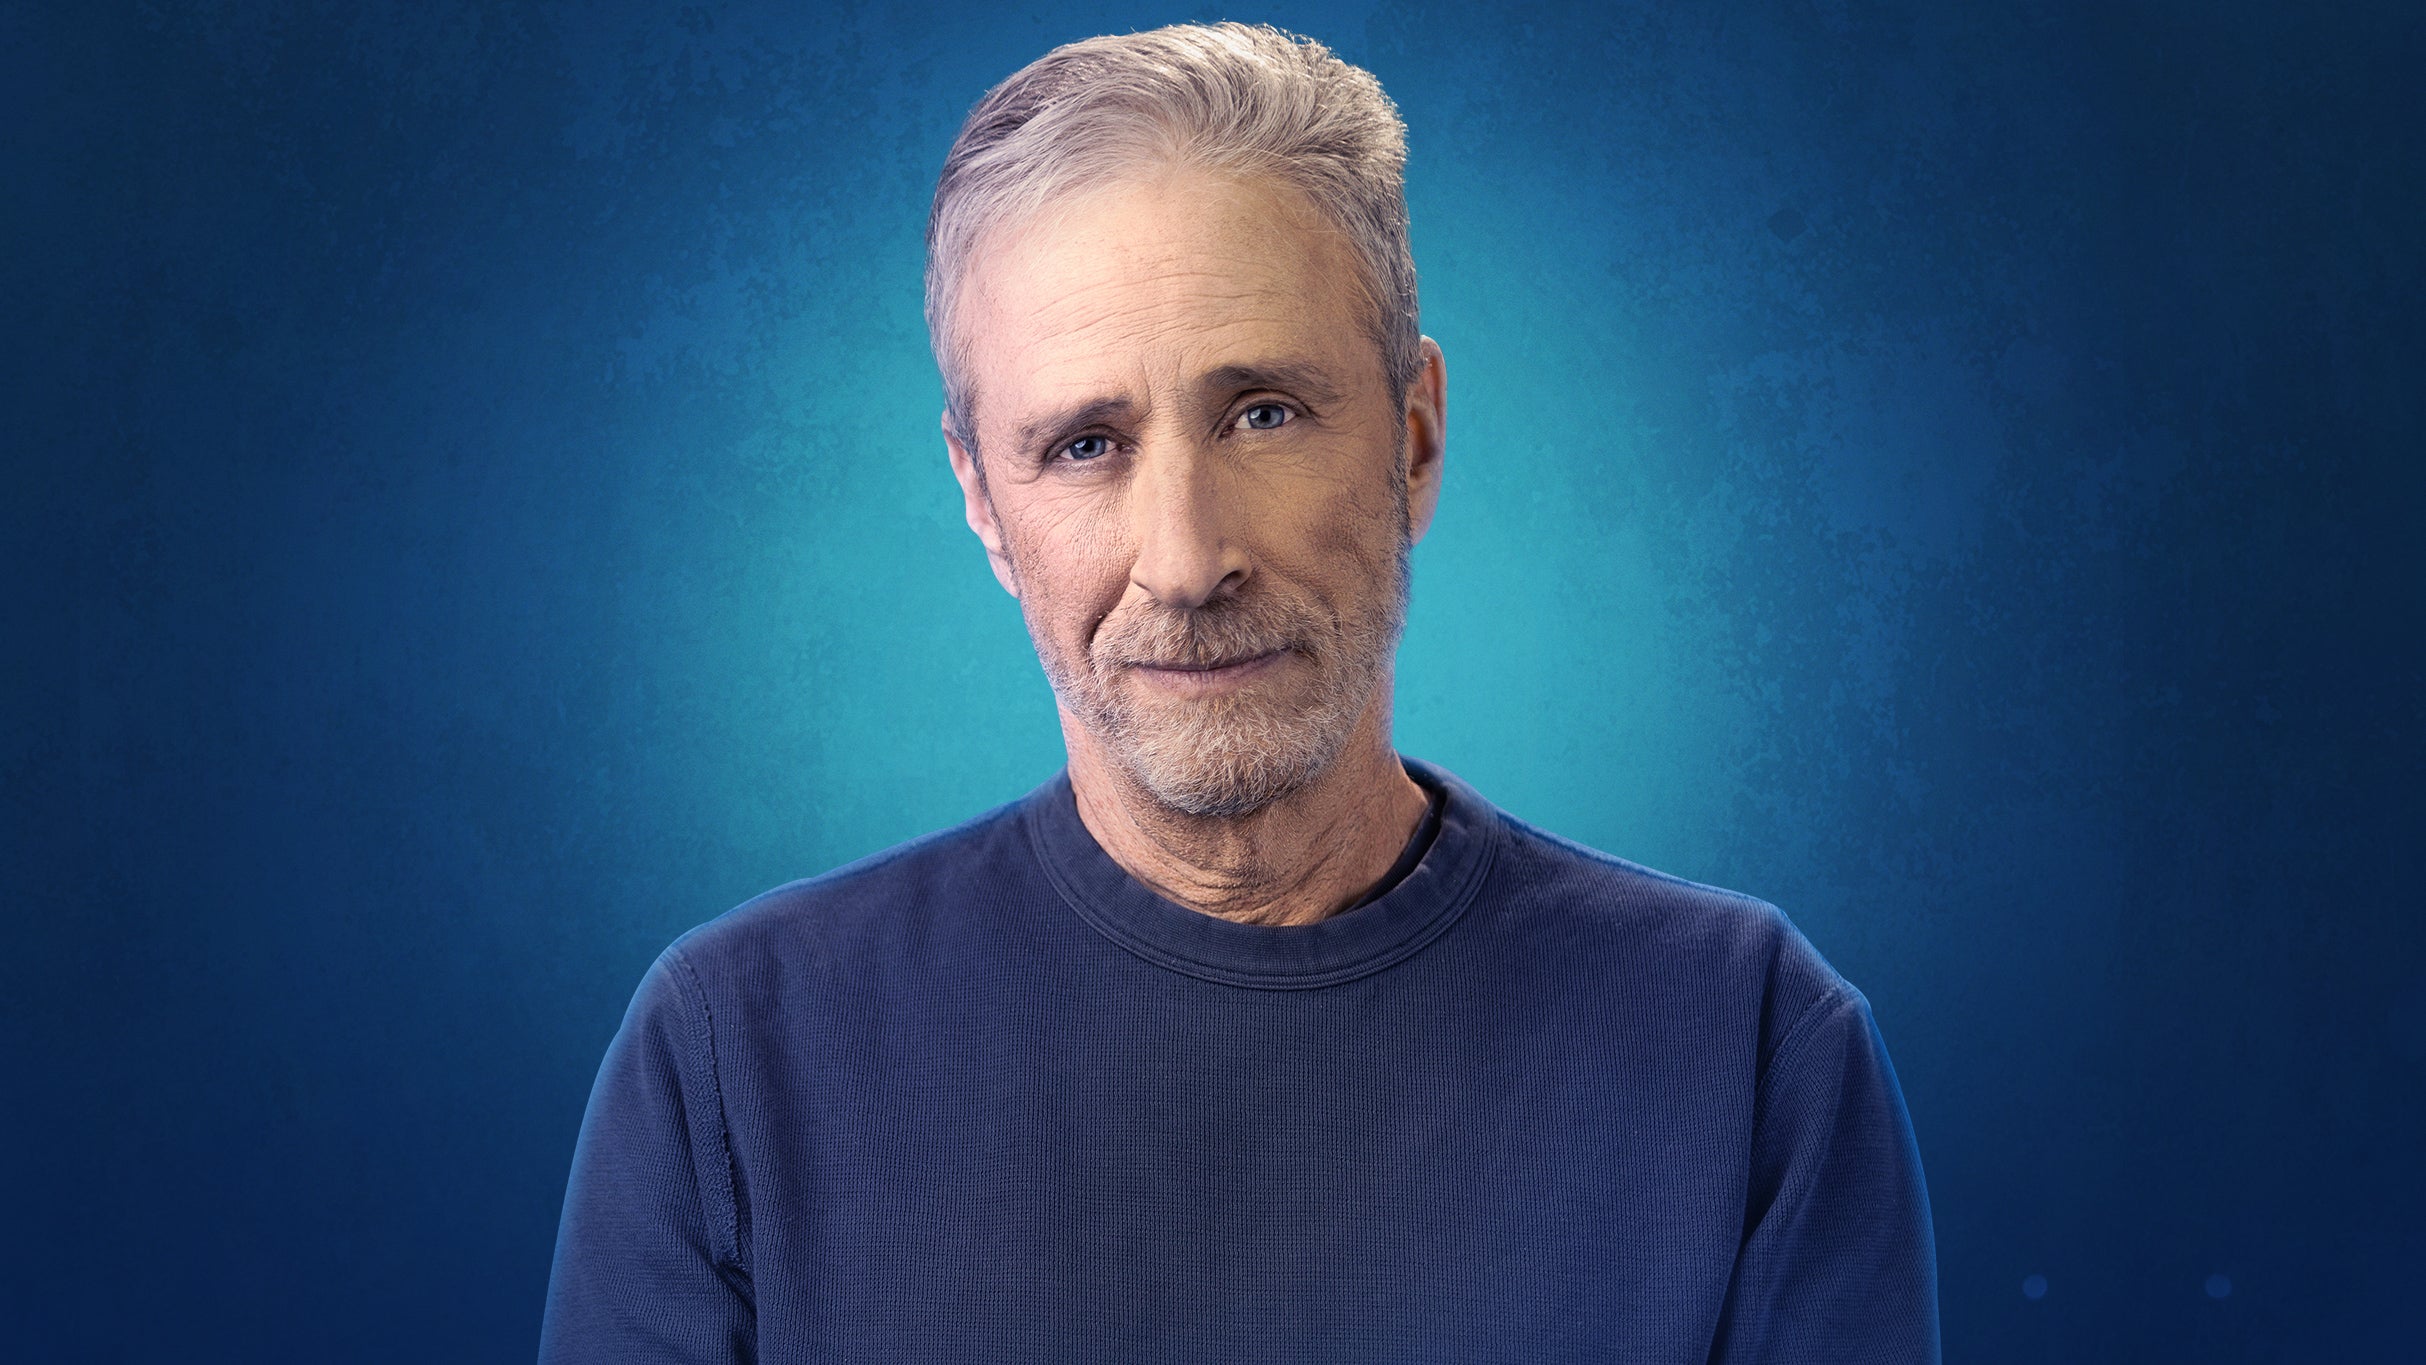 An Evening with Jon Stewart in Temecula promo photo for Pechanga Venue presale offer code